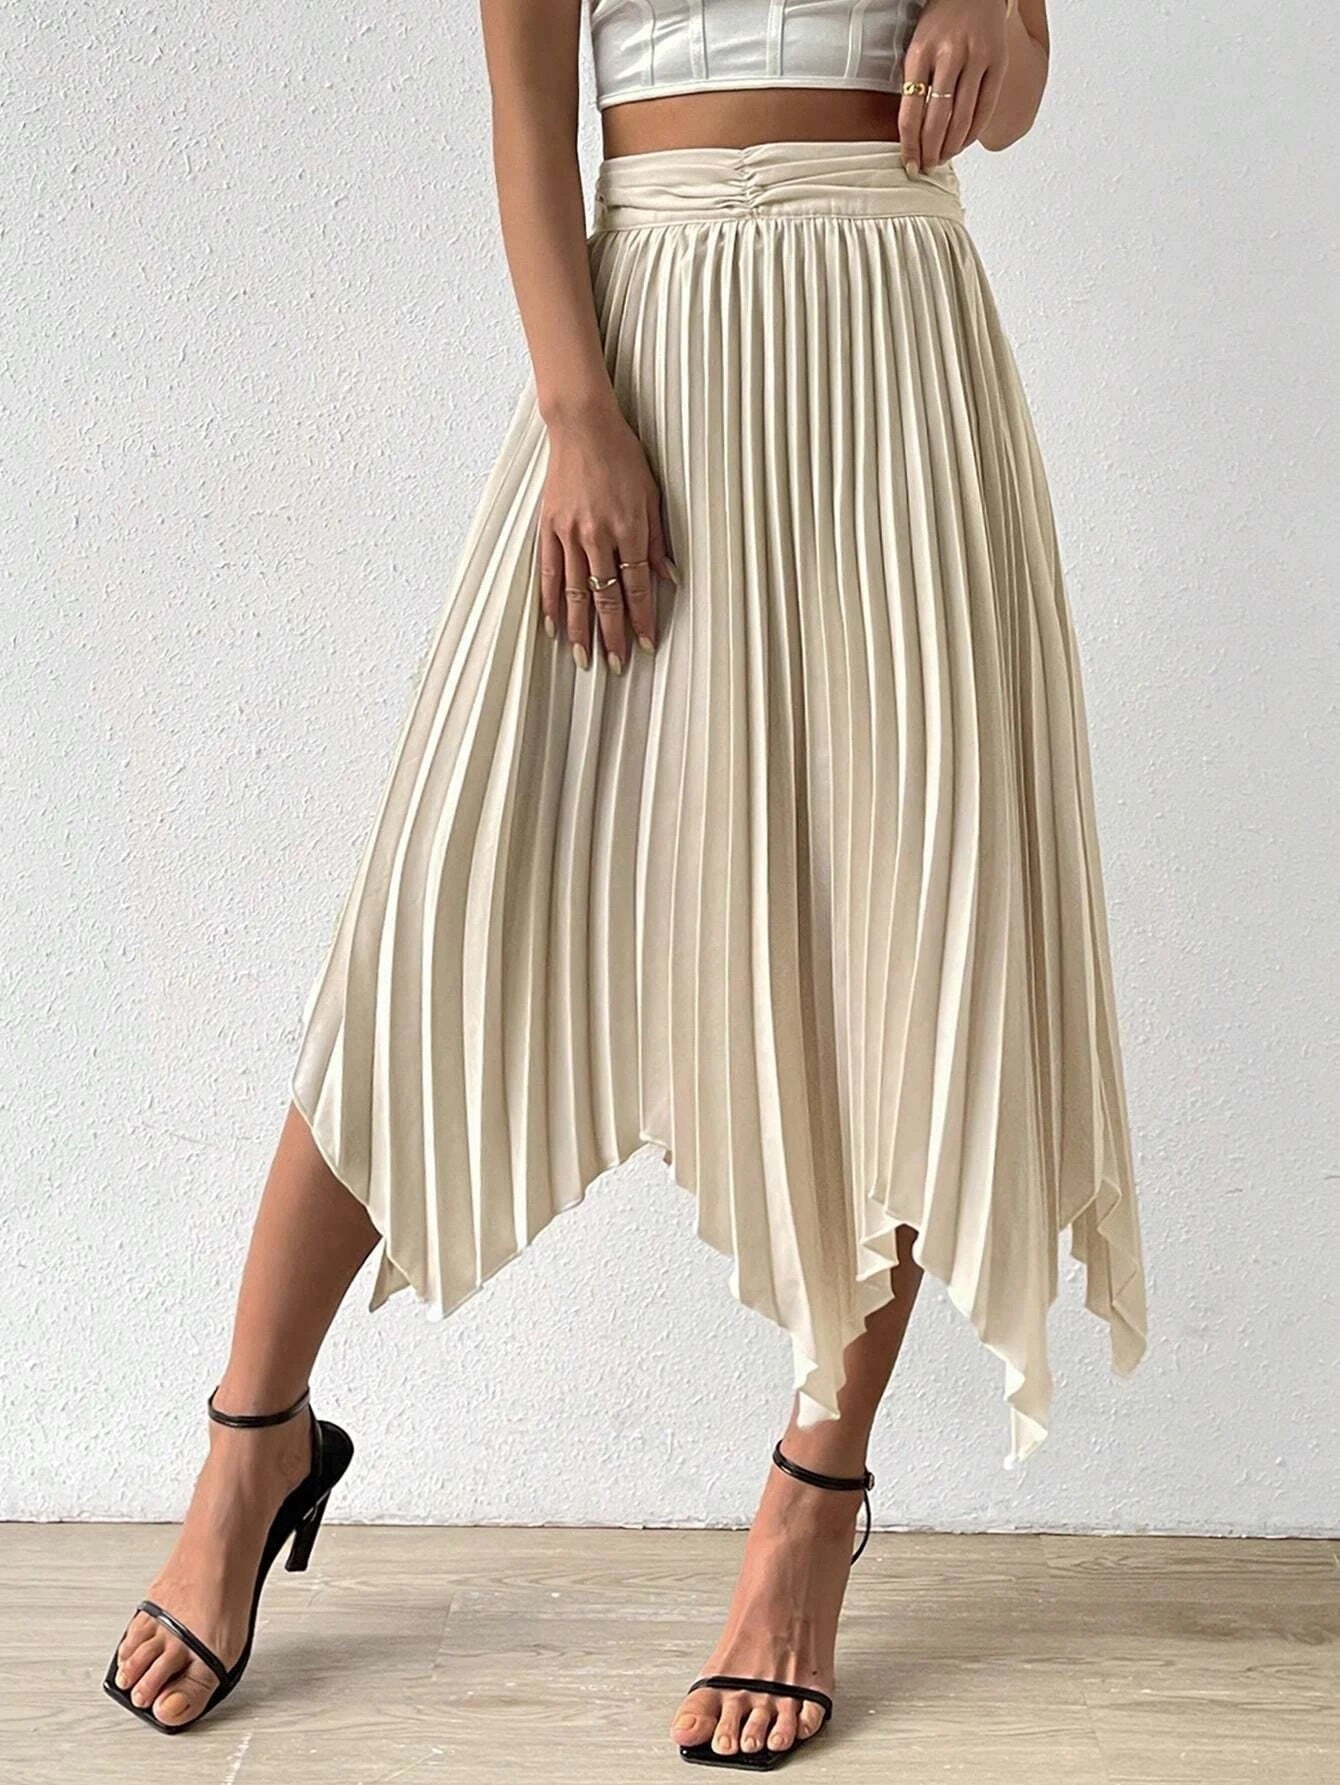 CM-BS059490 Women Casual Seoul Style Solid Hanky Hem Pleated Skirt - Apricot